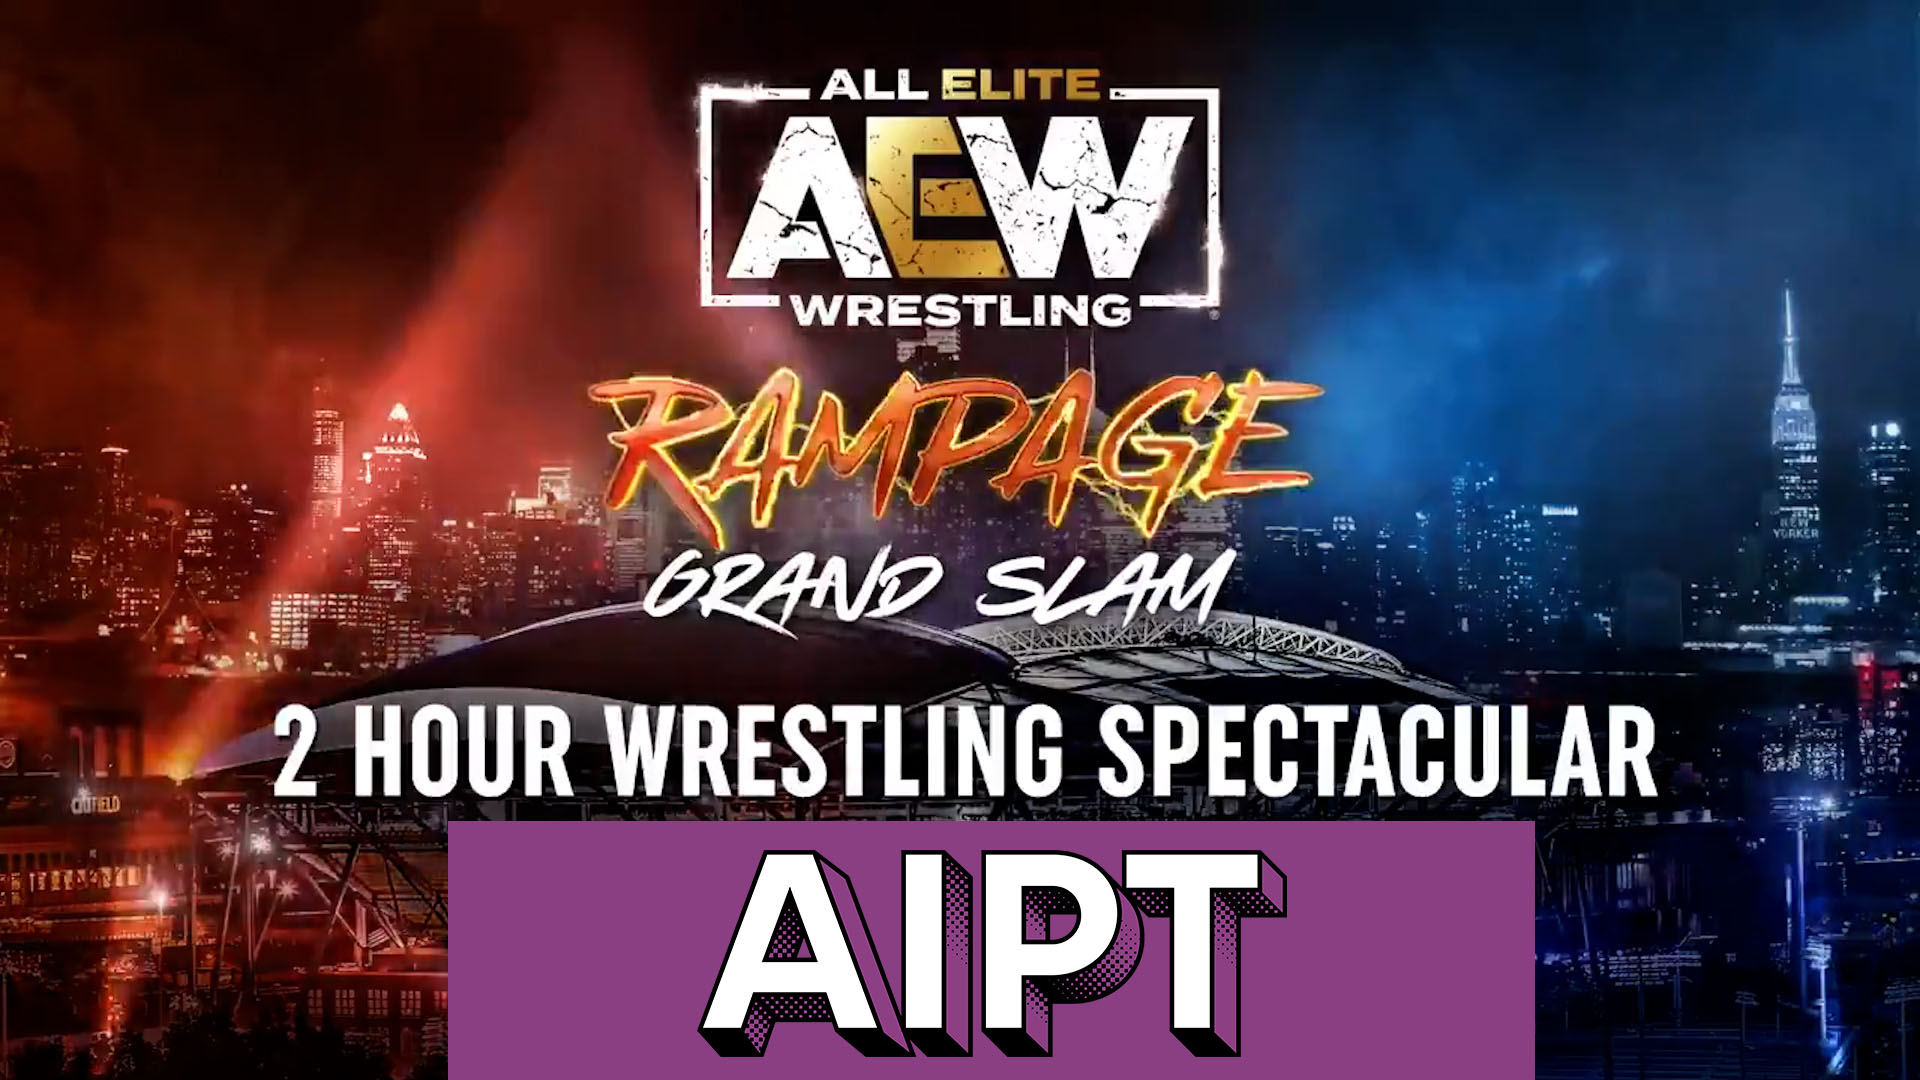 AEW Rampage Grand Slam (Video)Review: A Live Fan's Perspective